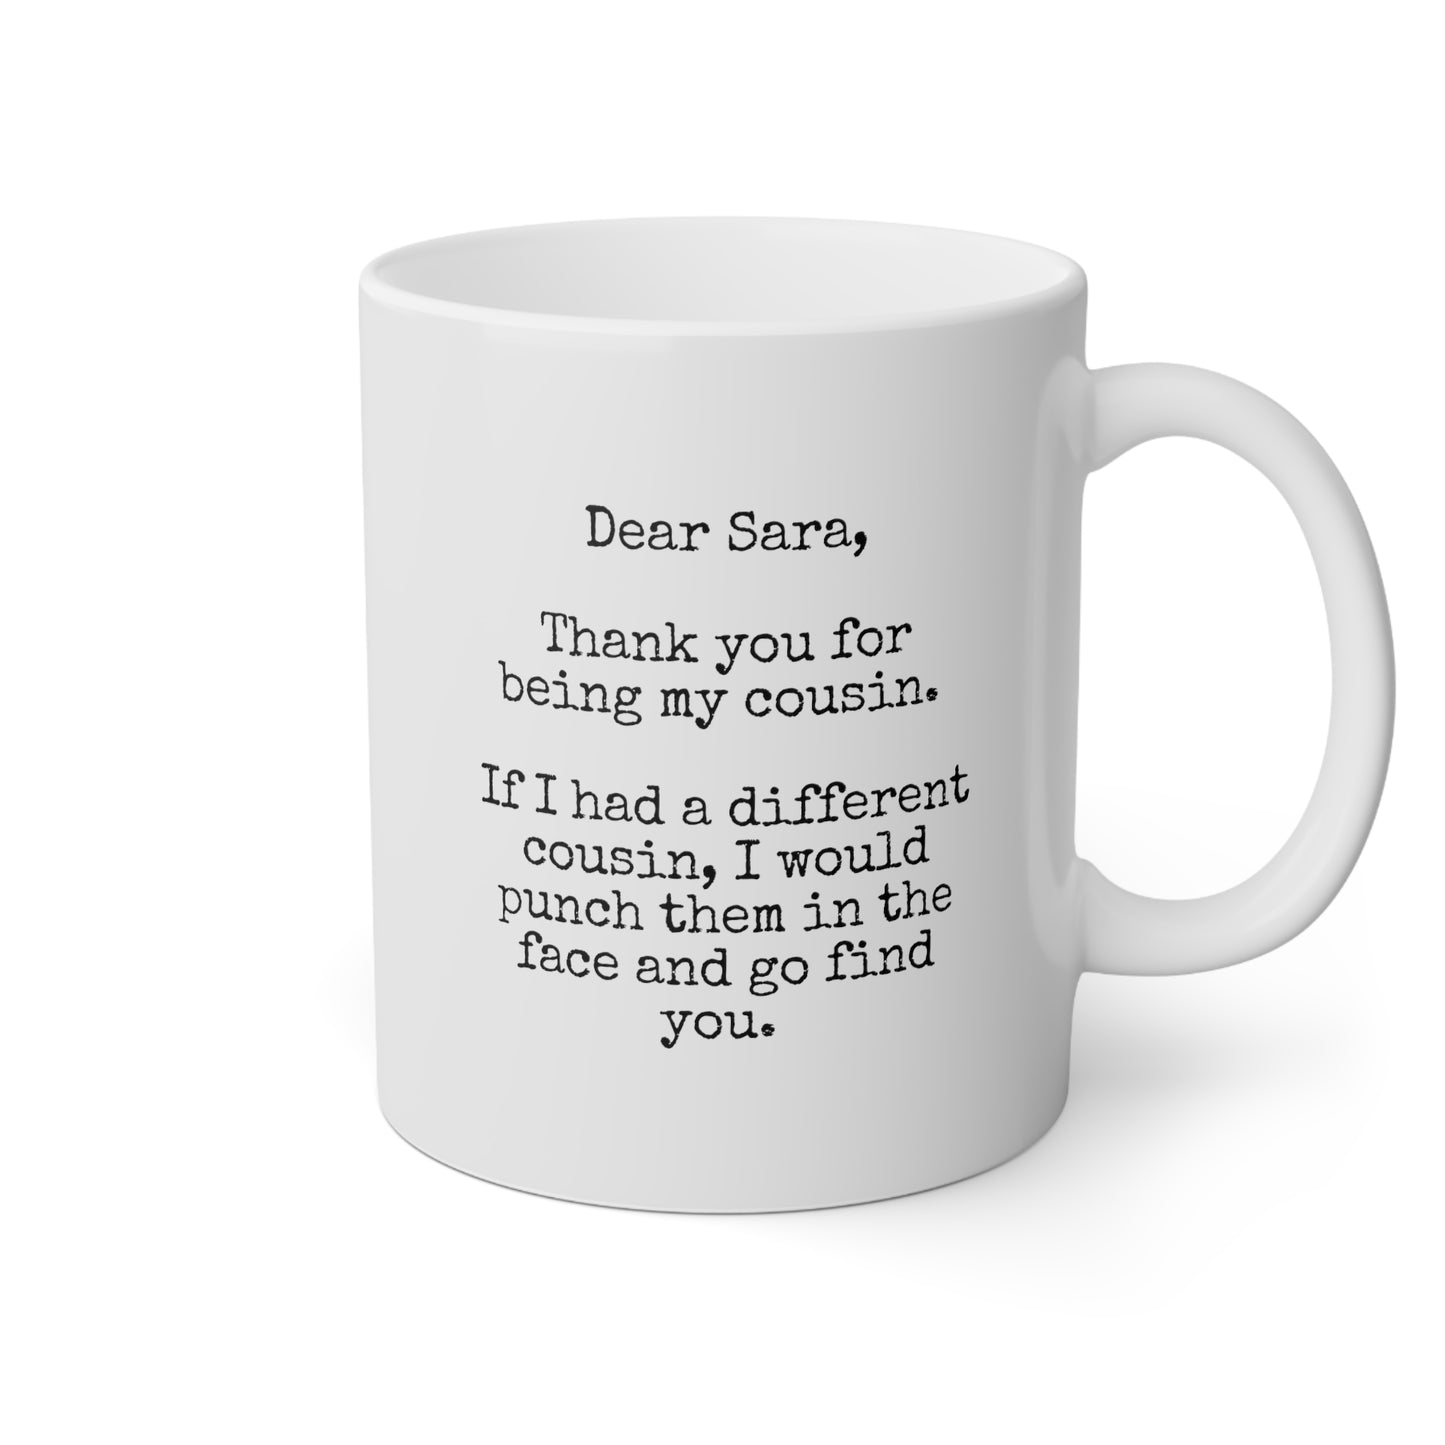 Thank You For Being My Cousin 11oz white funny large coffee mug gift punch face humor custom customized personalized waveywares wavey wares wavywares wavy wares